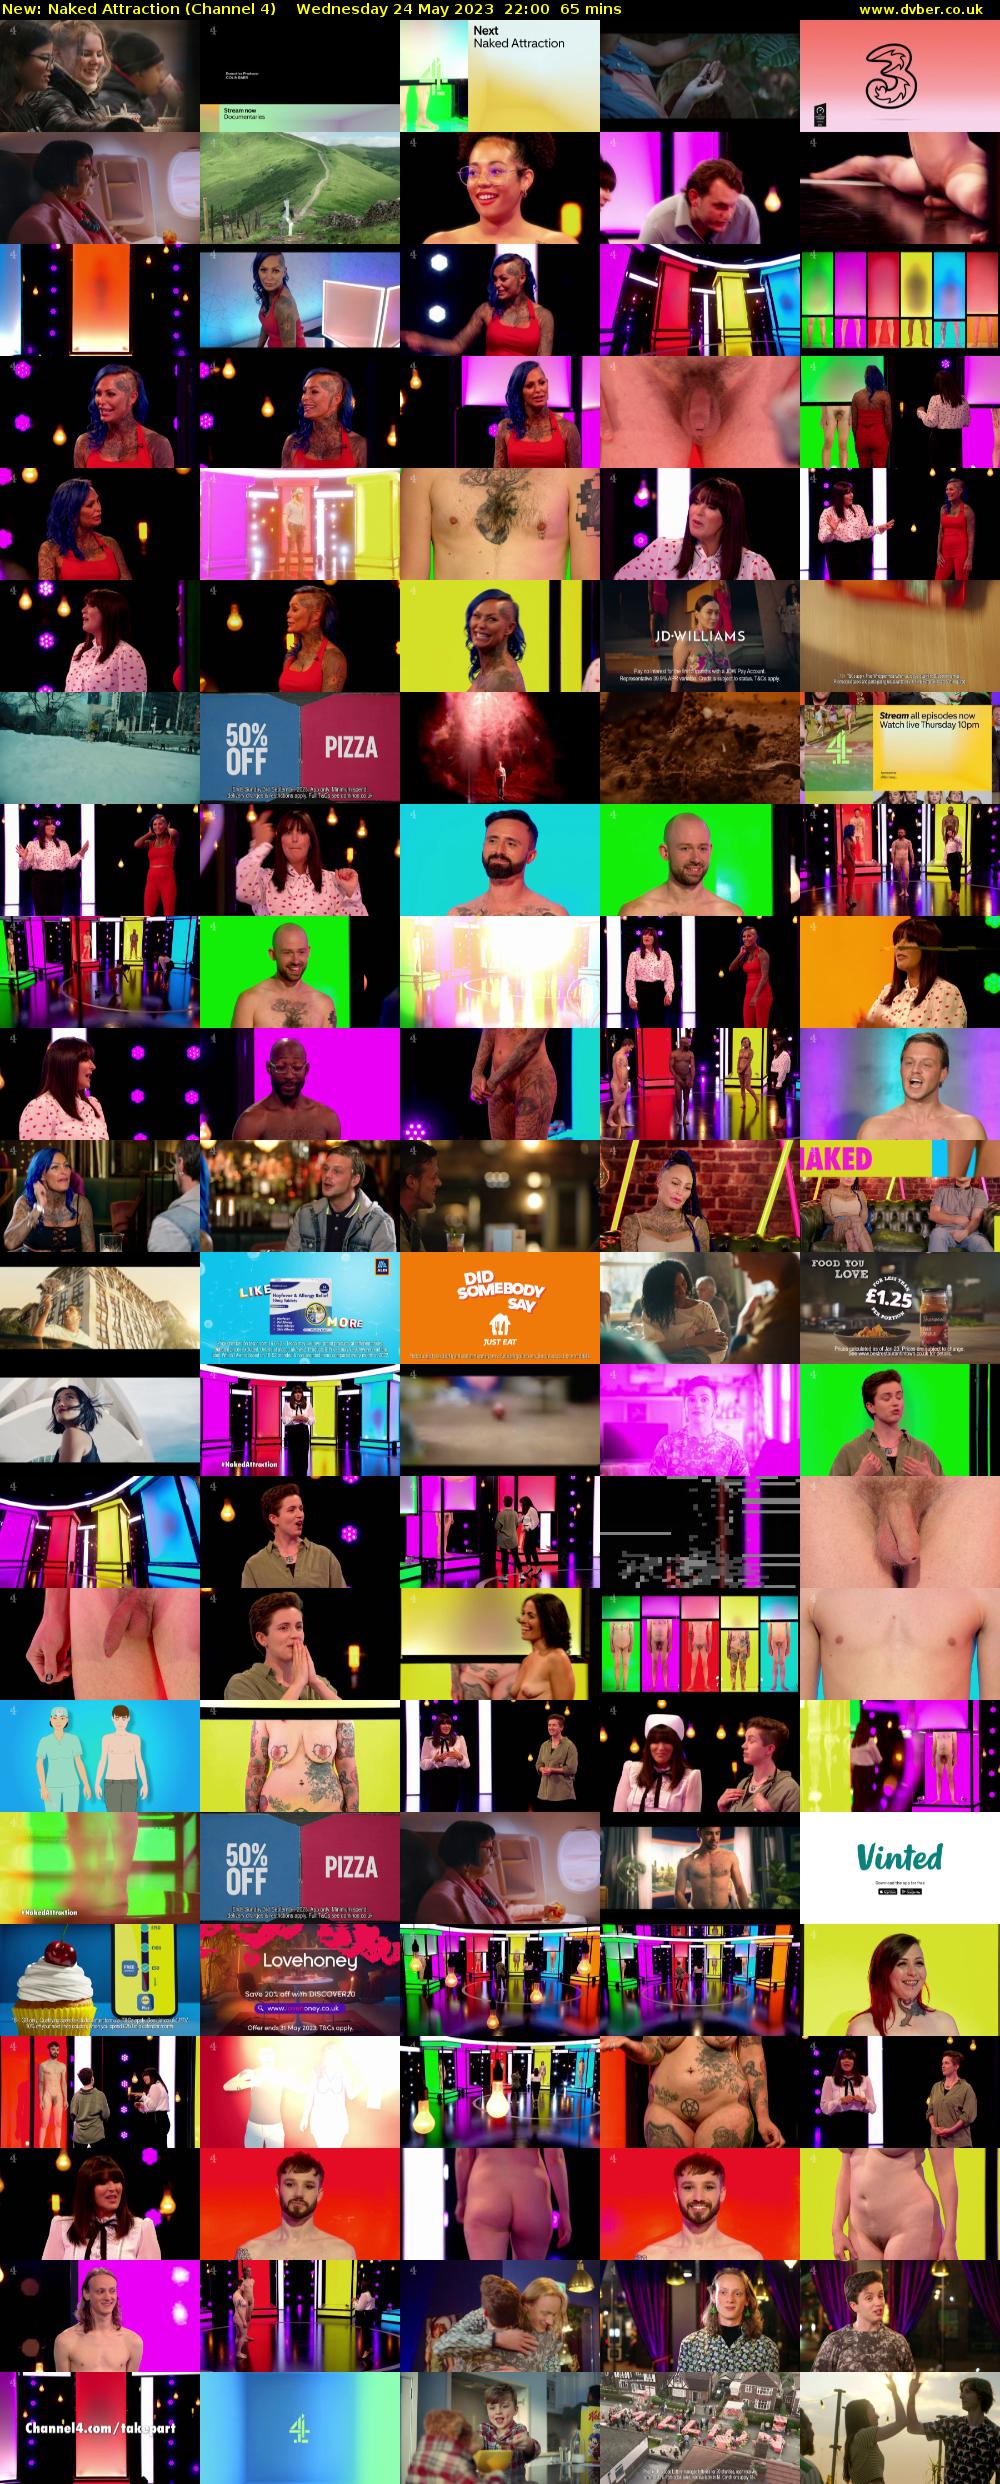 Naked Attraction (Channel 4) Wednesday 24 May 2023 22:00 - 23:05